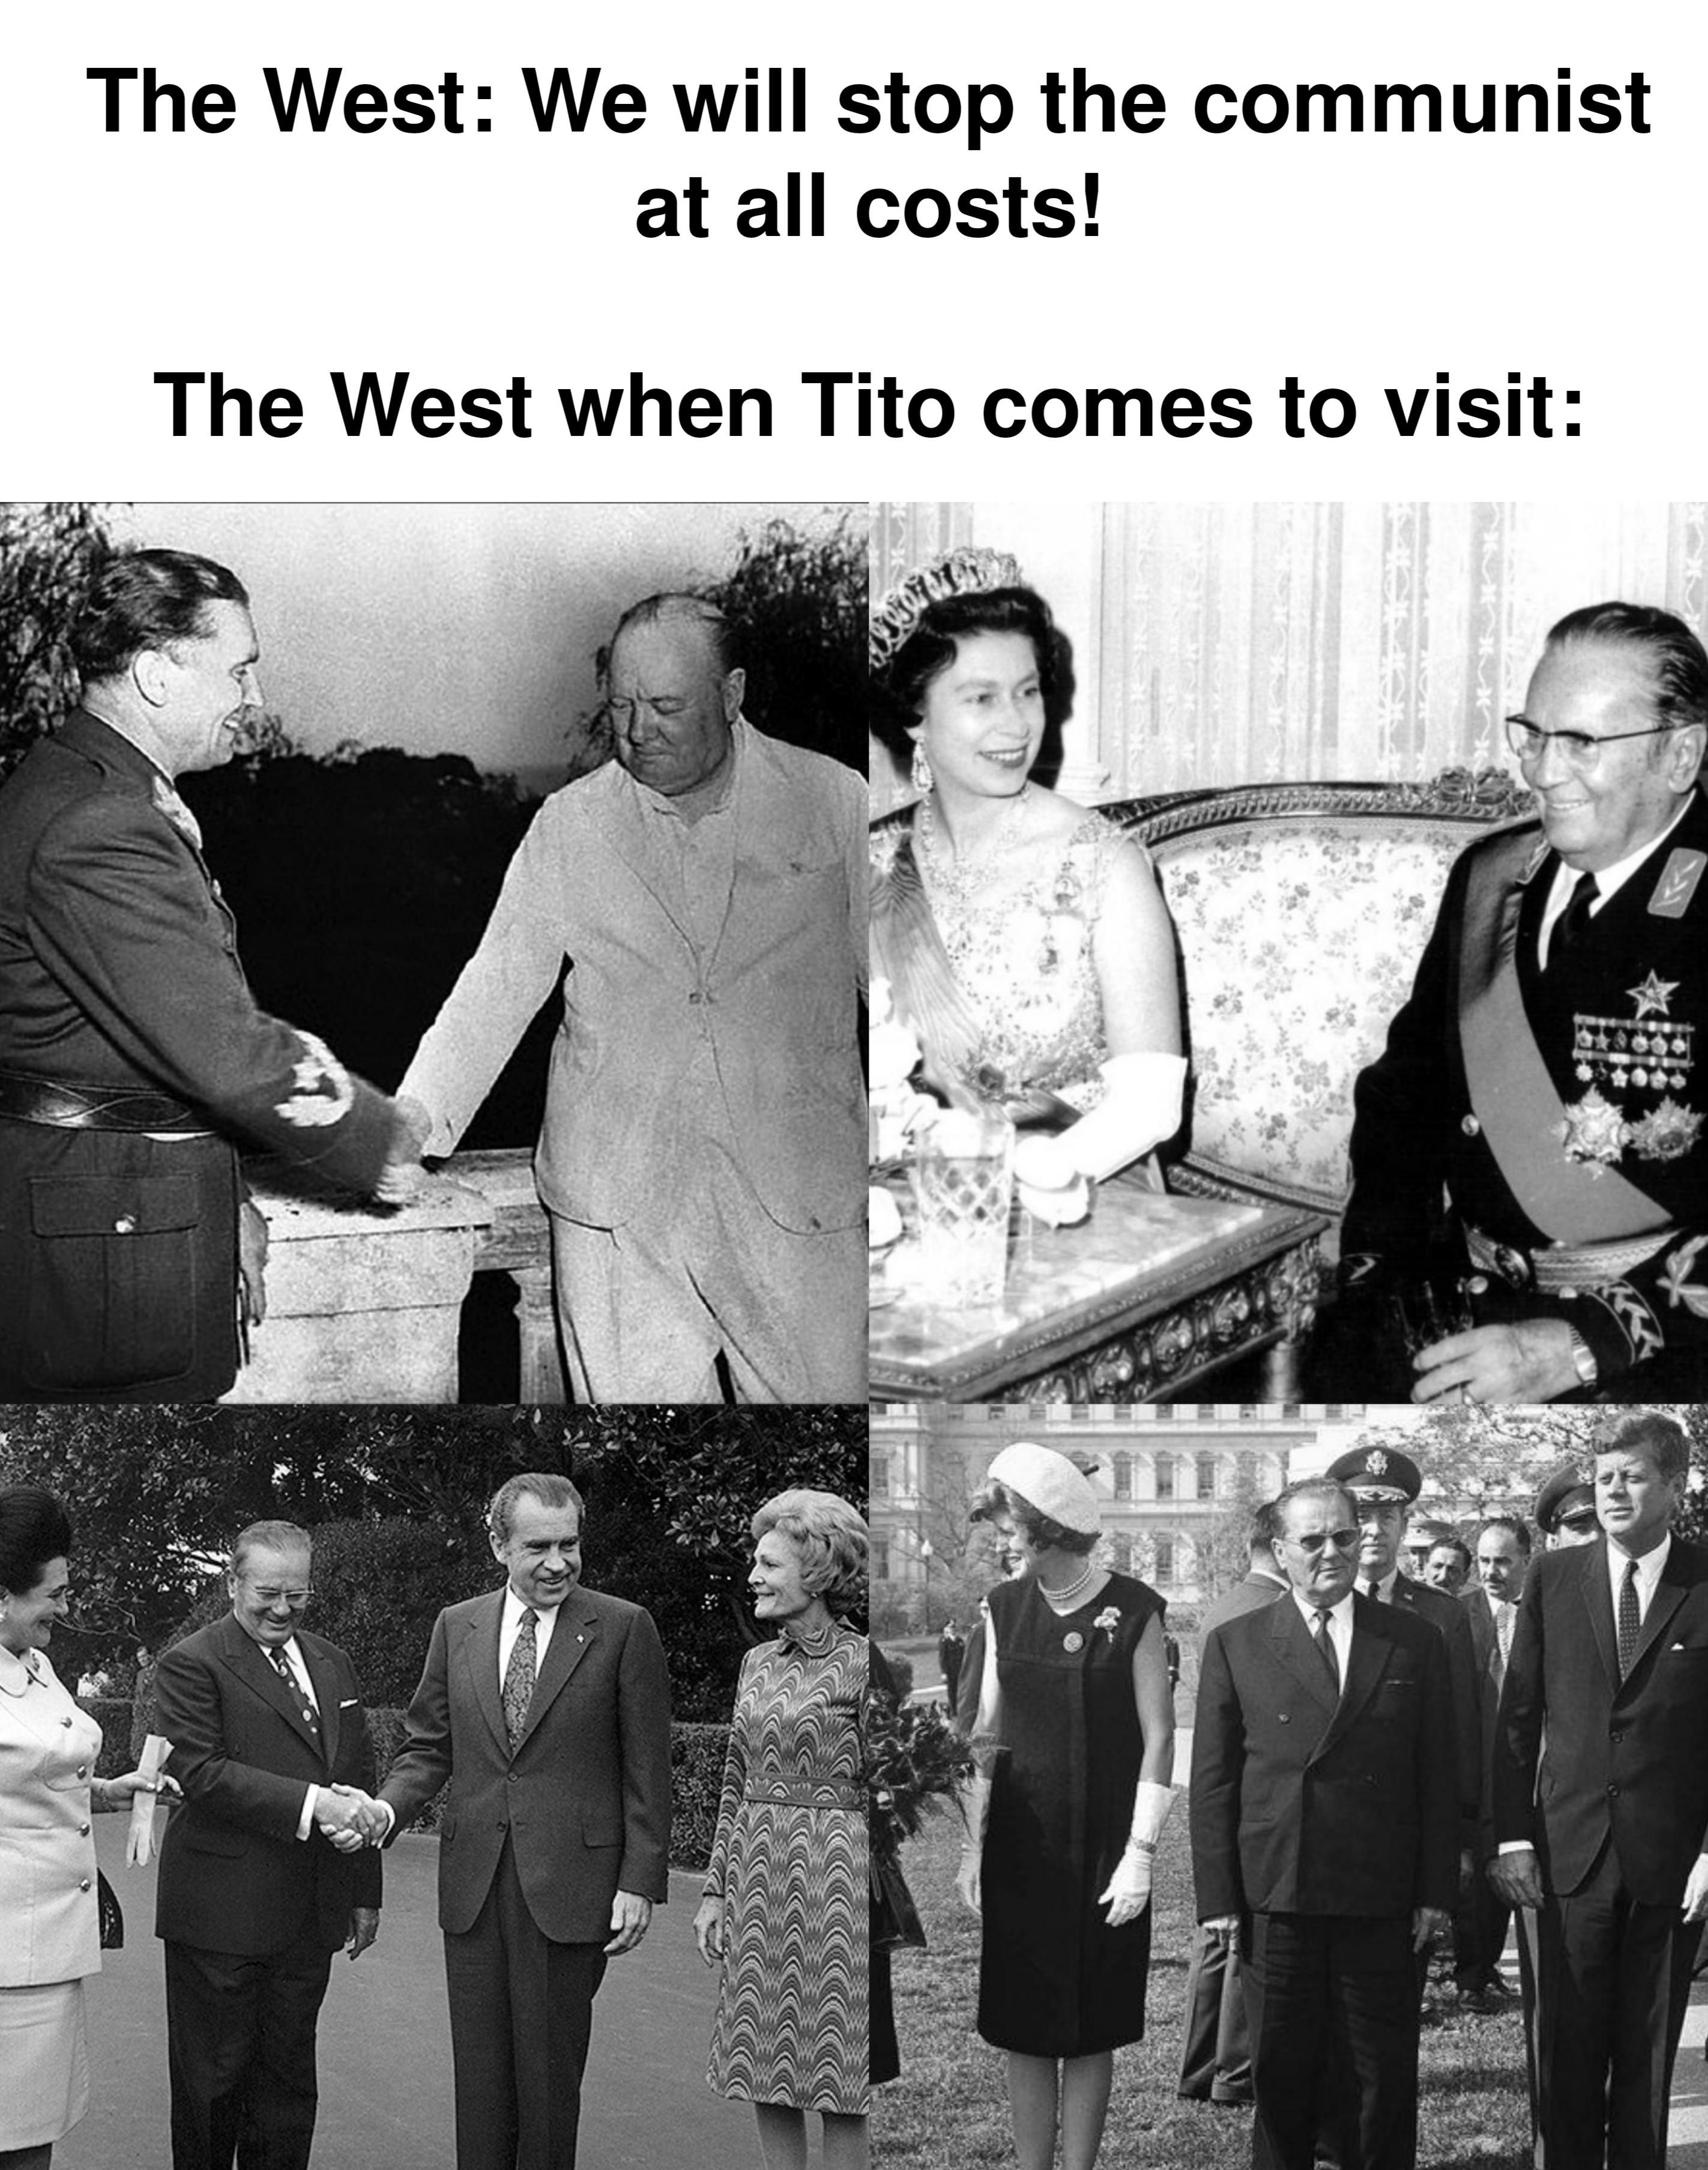 Tito really knew how to make friends.